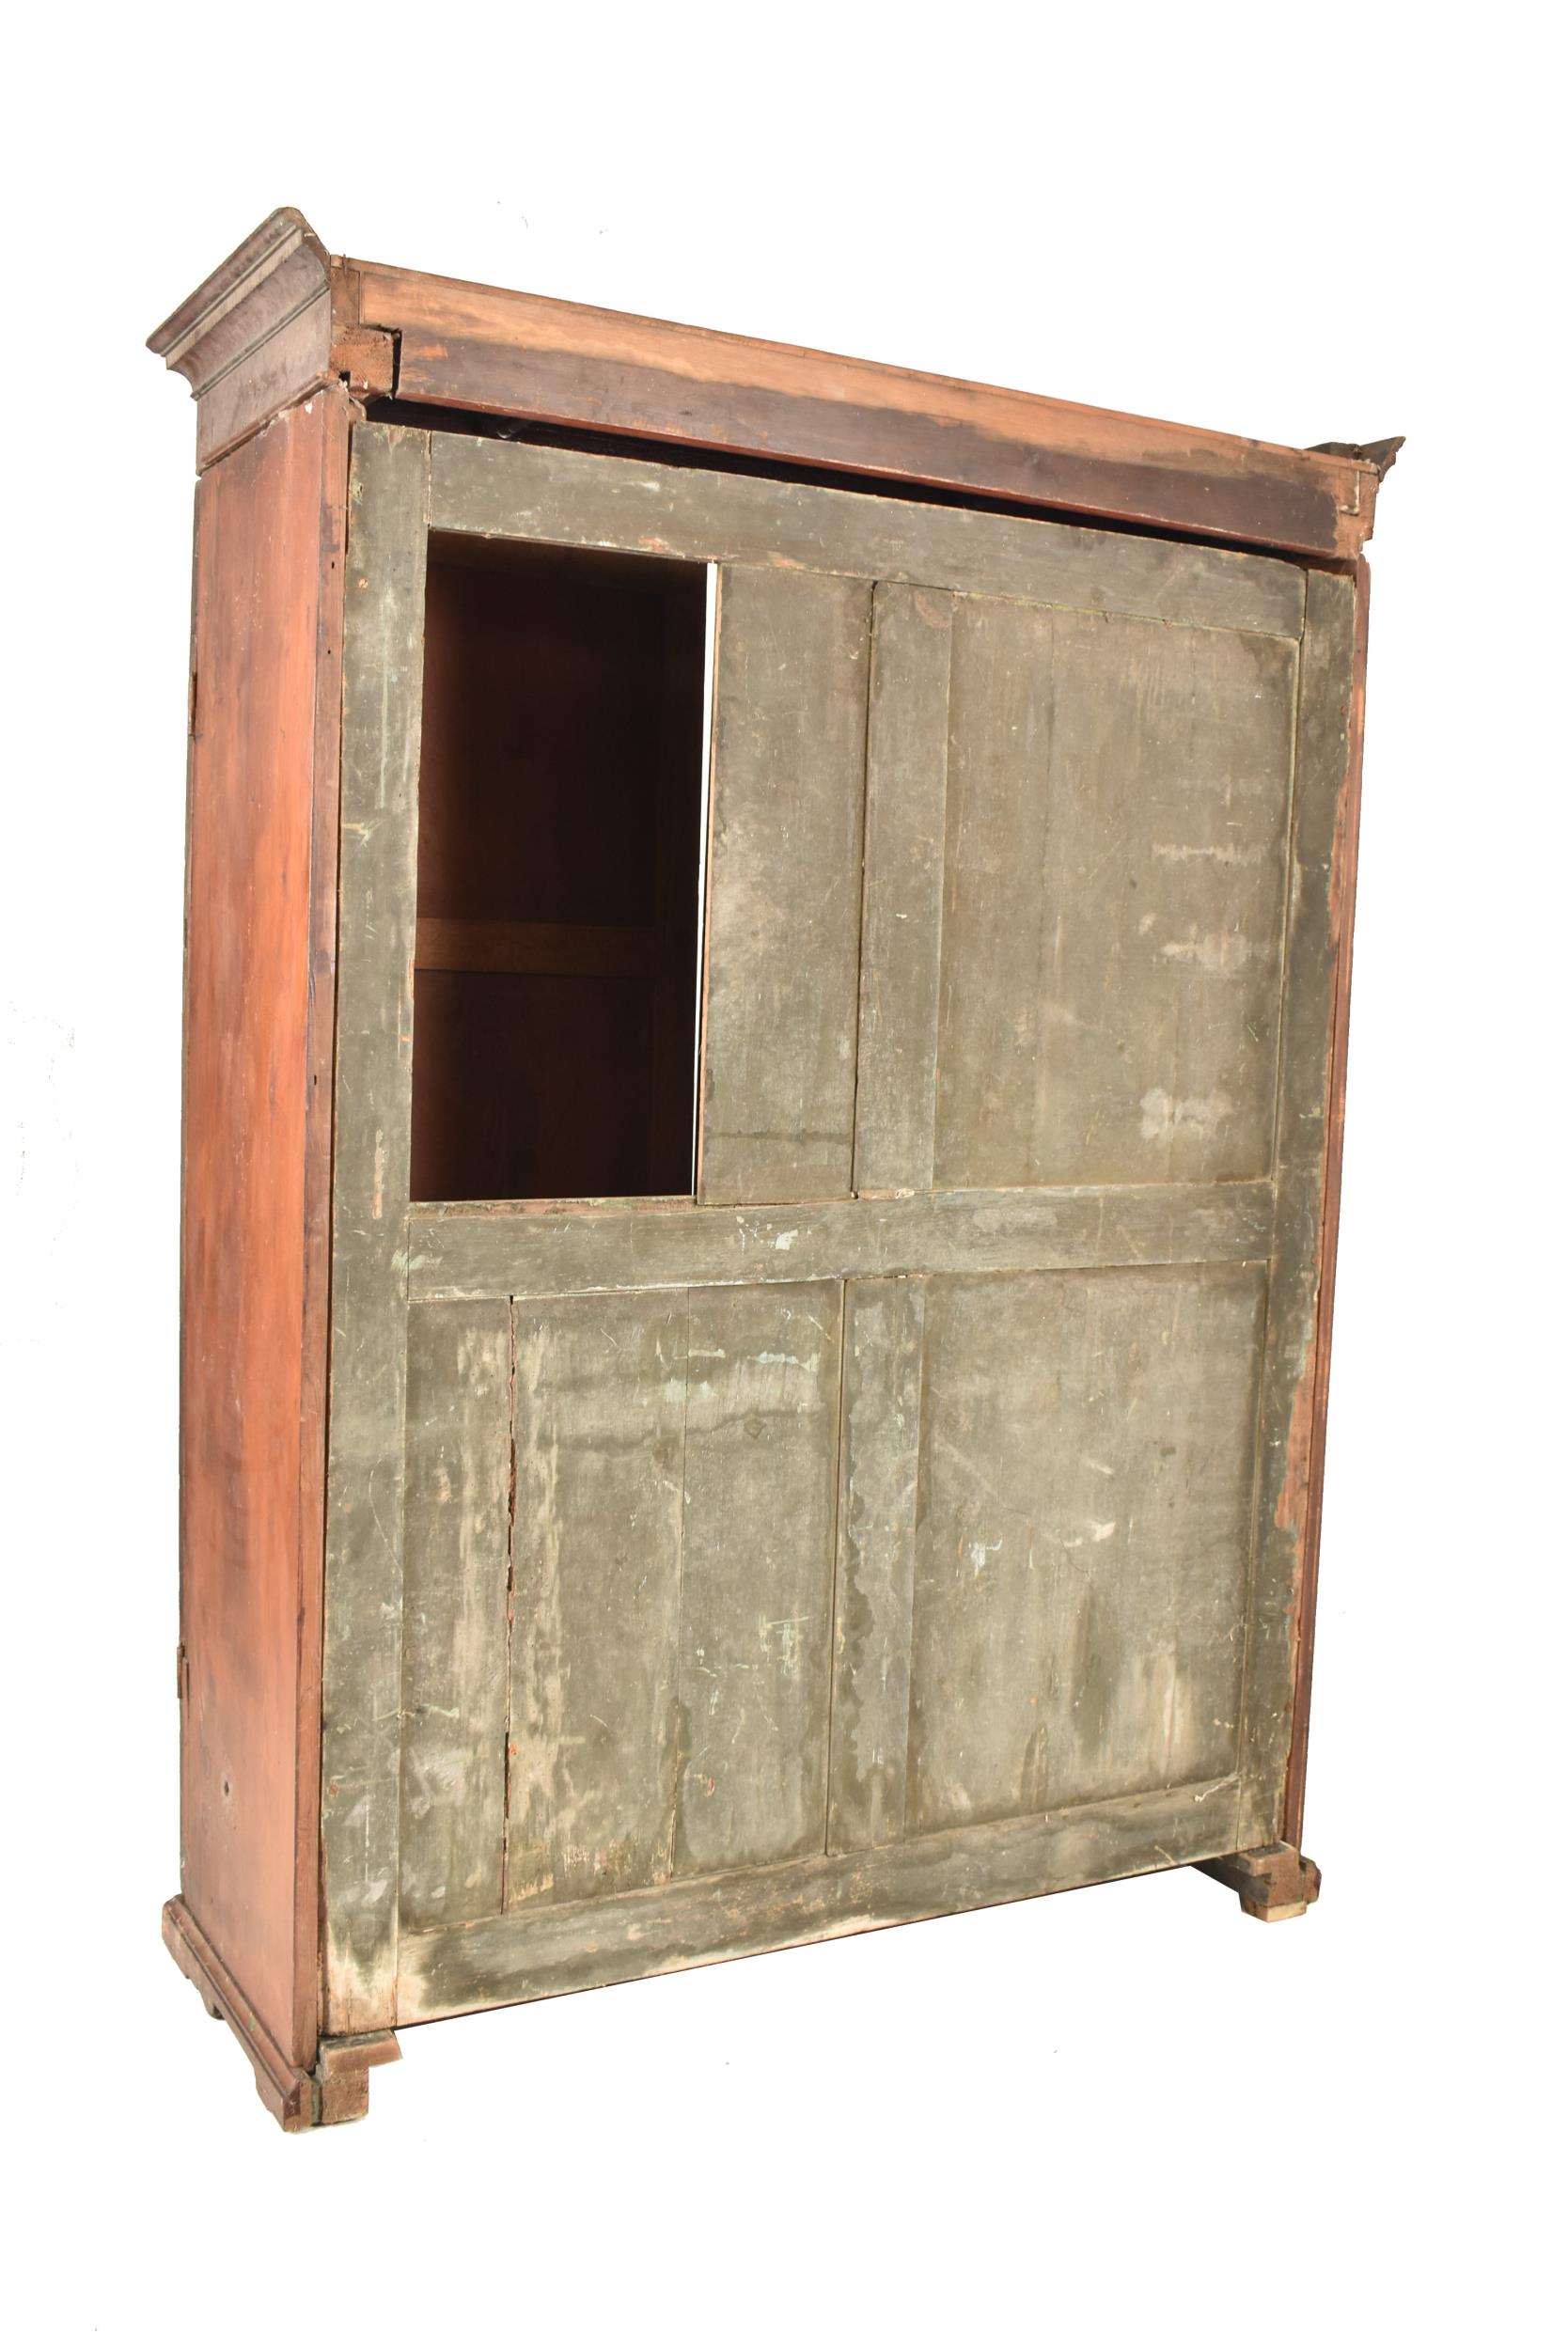 LARGE EARLY 19TH CENTURY GEORGE III DOUBLE WARDROBE - Image 6 of 6